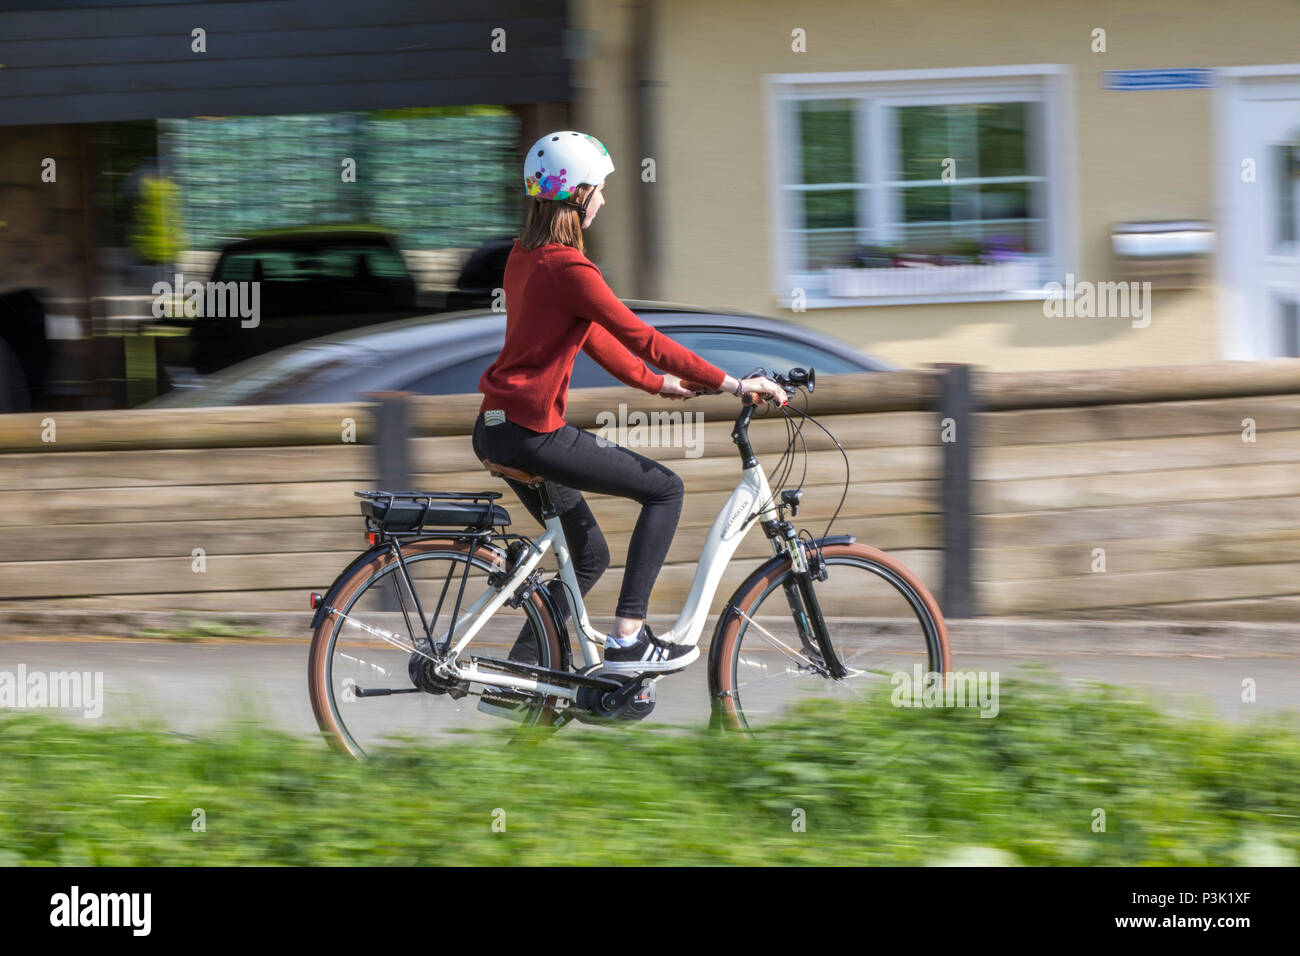 Young woman rides an e-bike, electric bike, electric motor assisted driving, Stock Photo